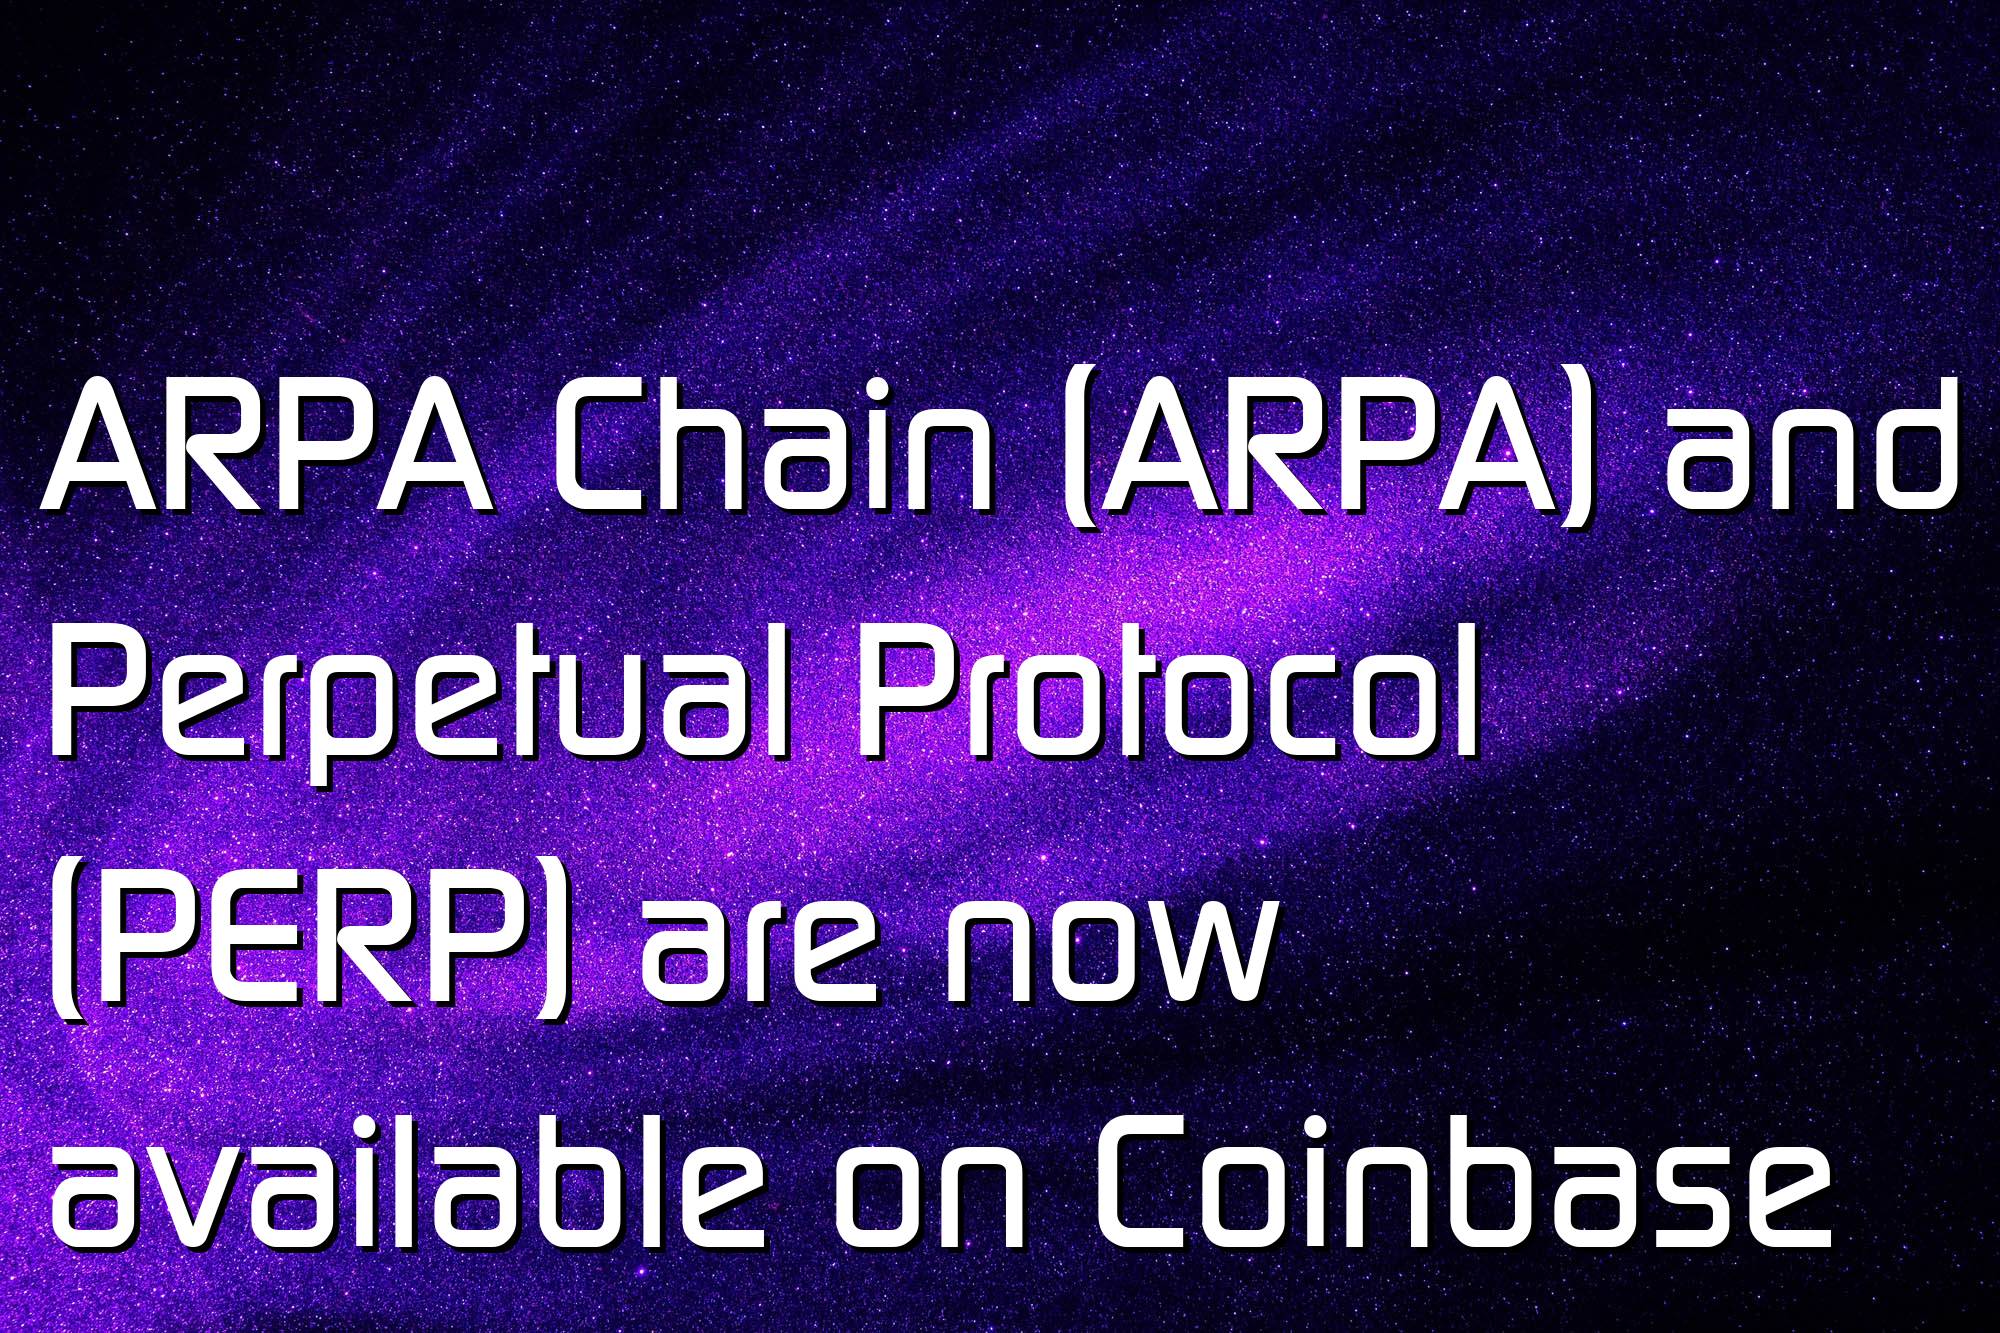 @$66729.13 ARPA Chain (ARPA) and Perpetual Protocol (PERP) are now available on Coinbase